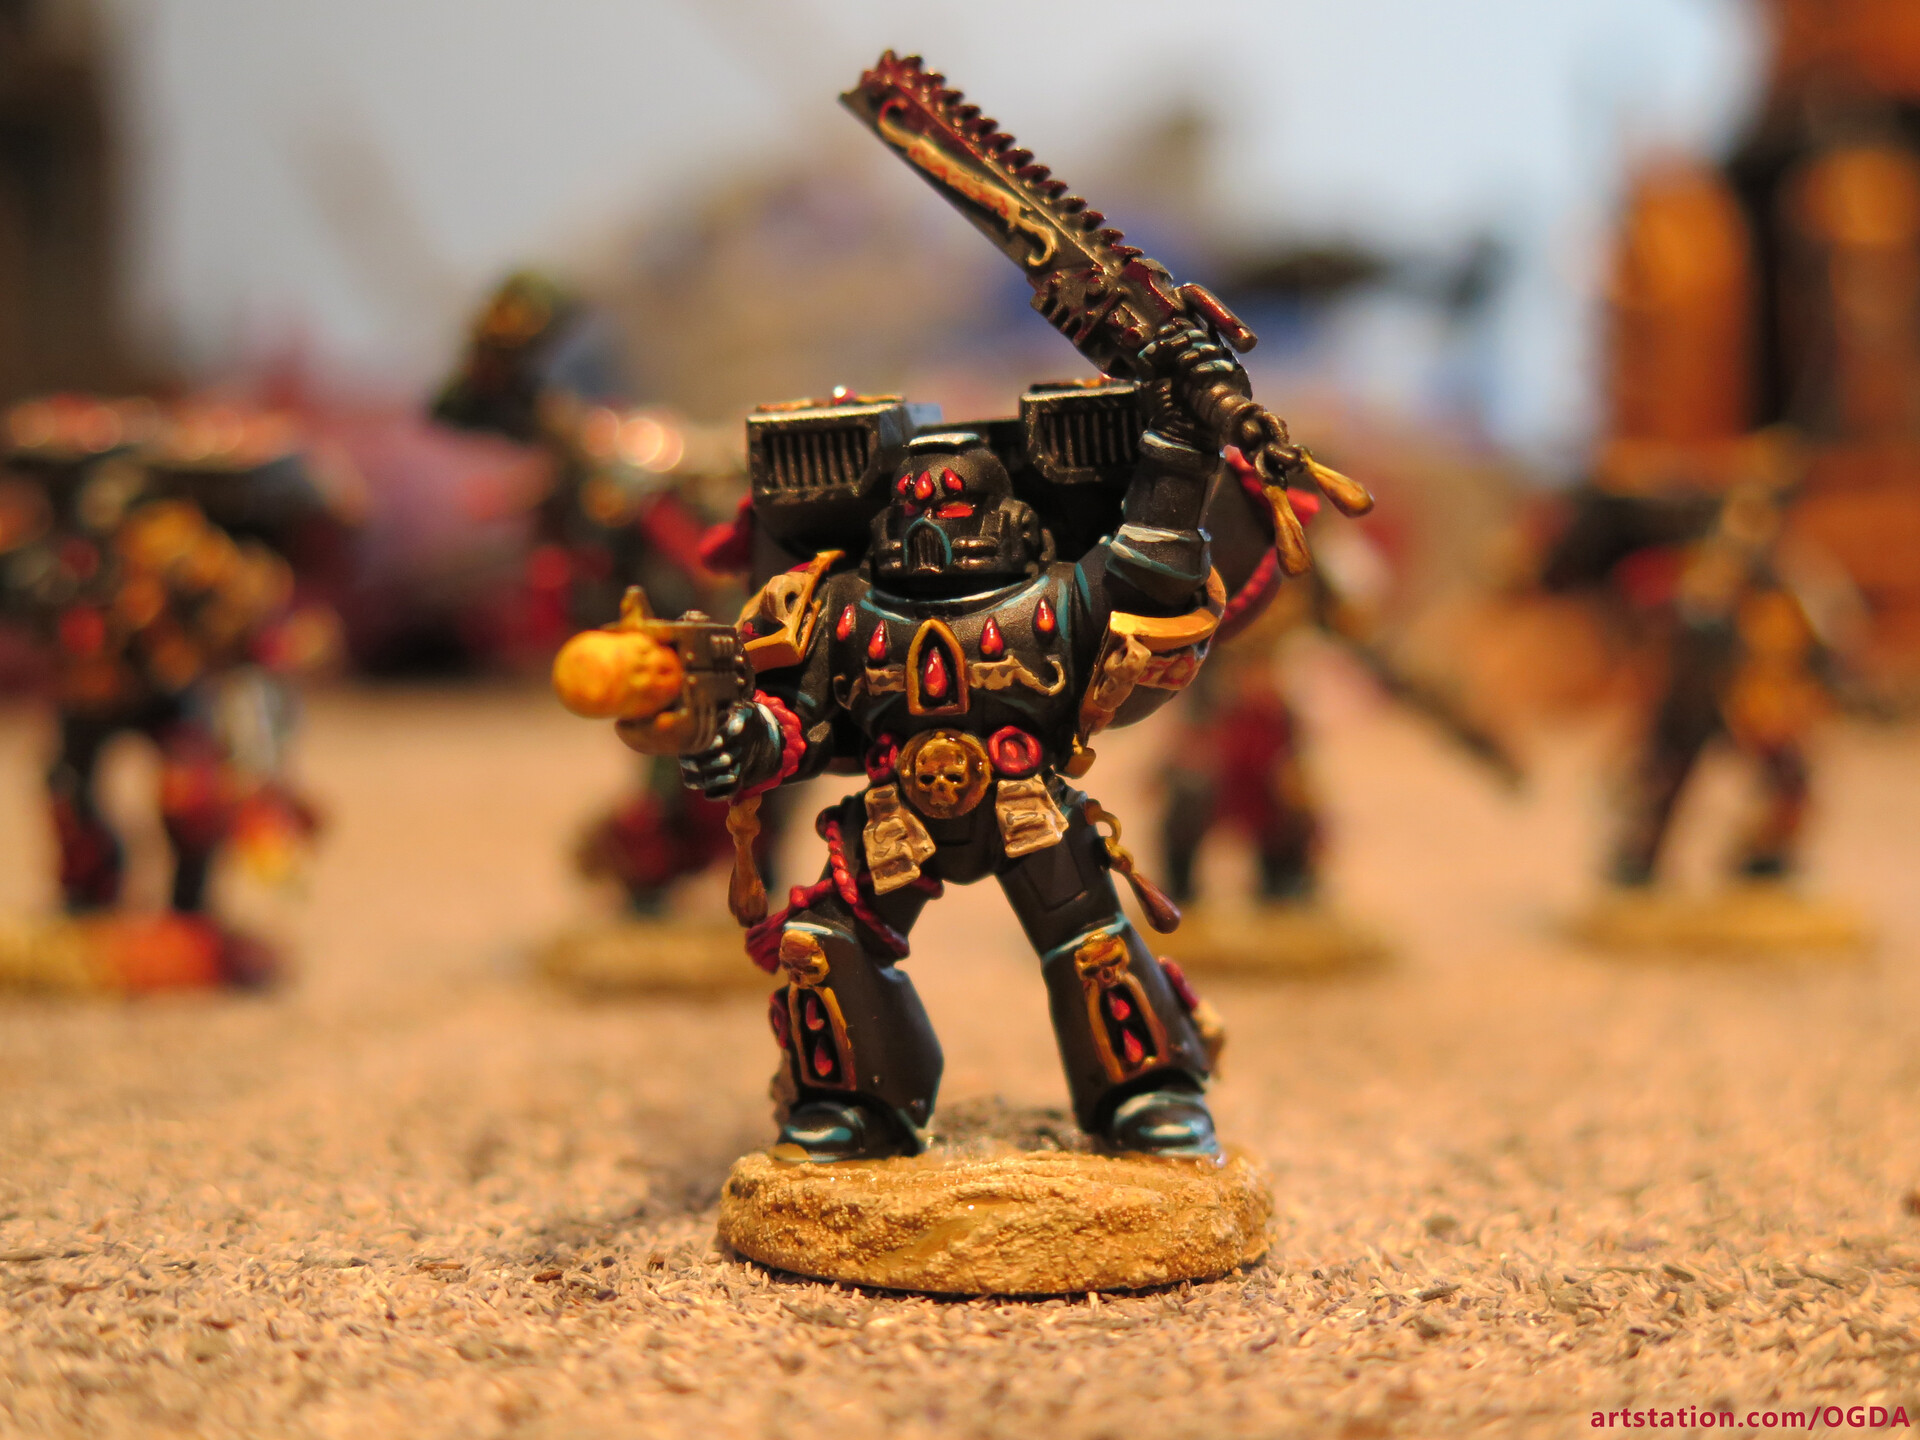  Blood Angels Death Company Space Marines Warhammer 40k : Arts,  Crafts & Sewing